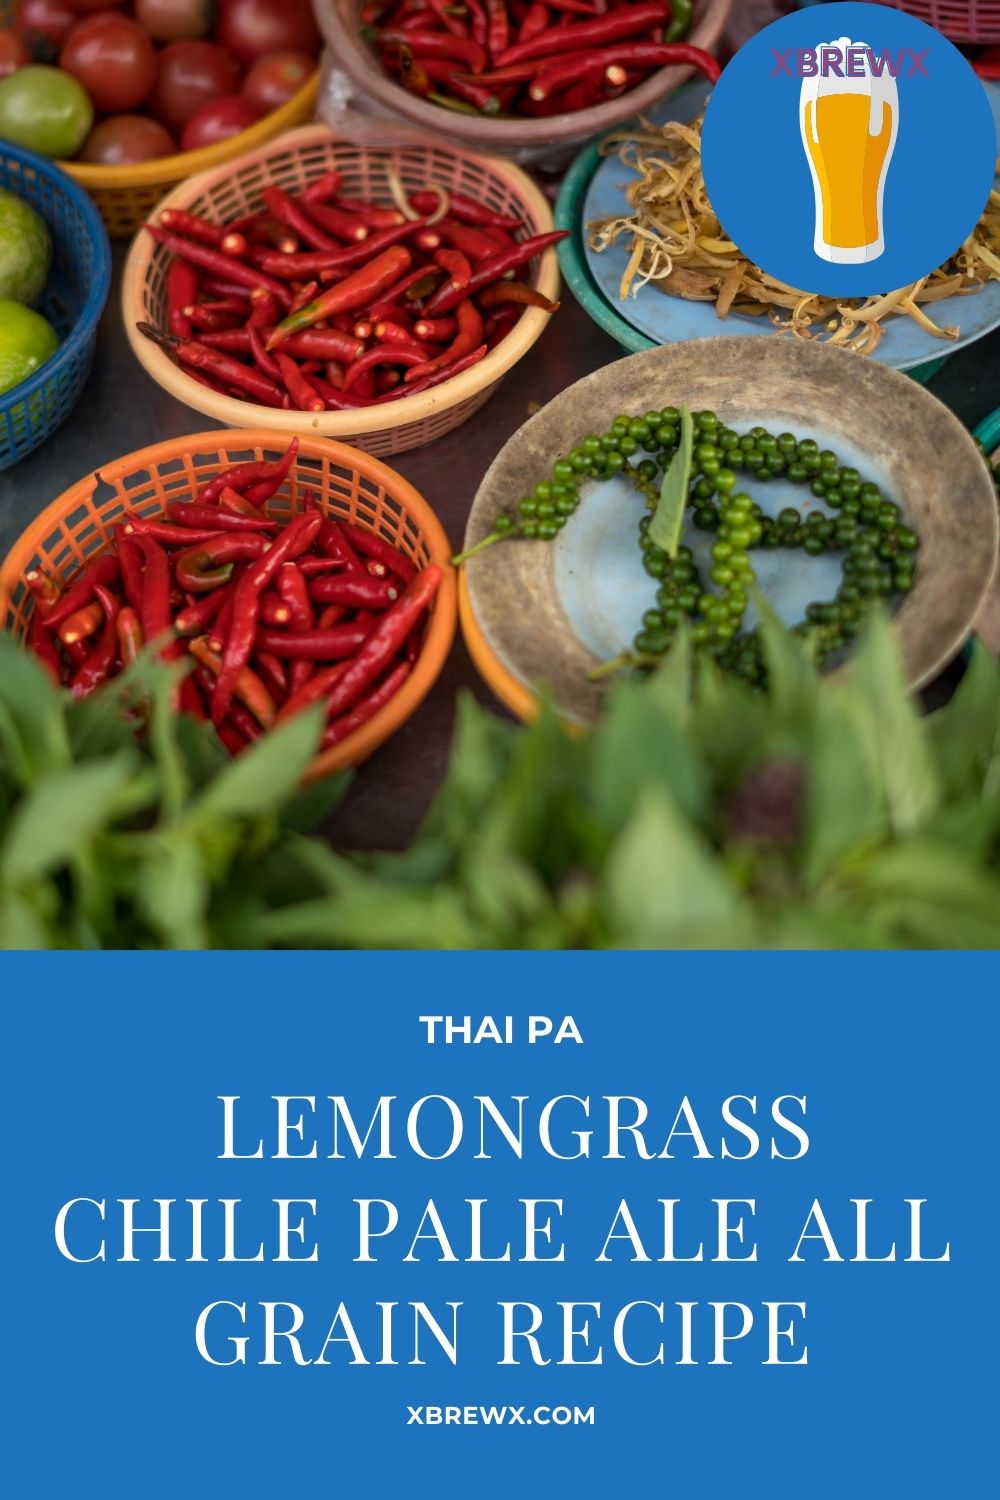 thai spices like green peppers and re chilis that can be used for a thai spice flavored beer